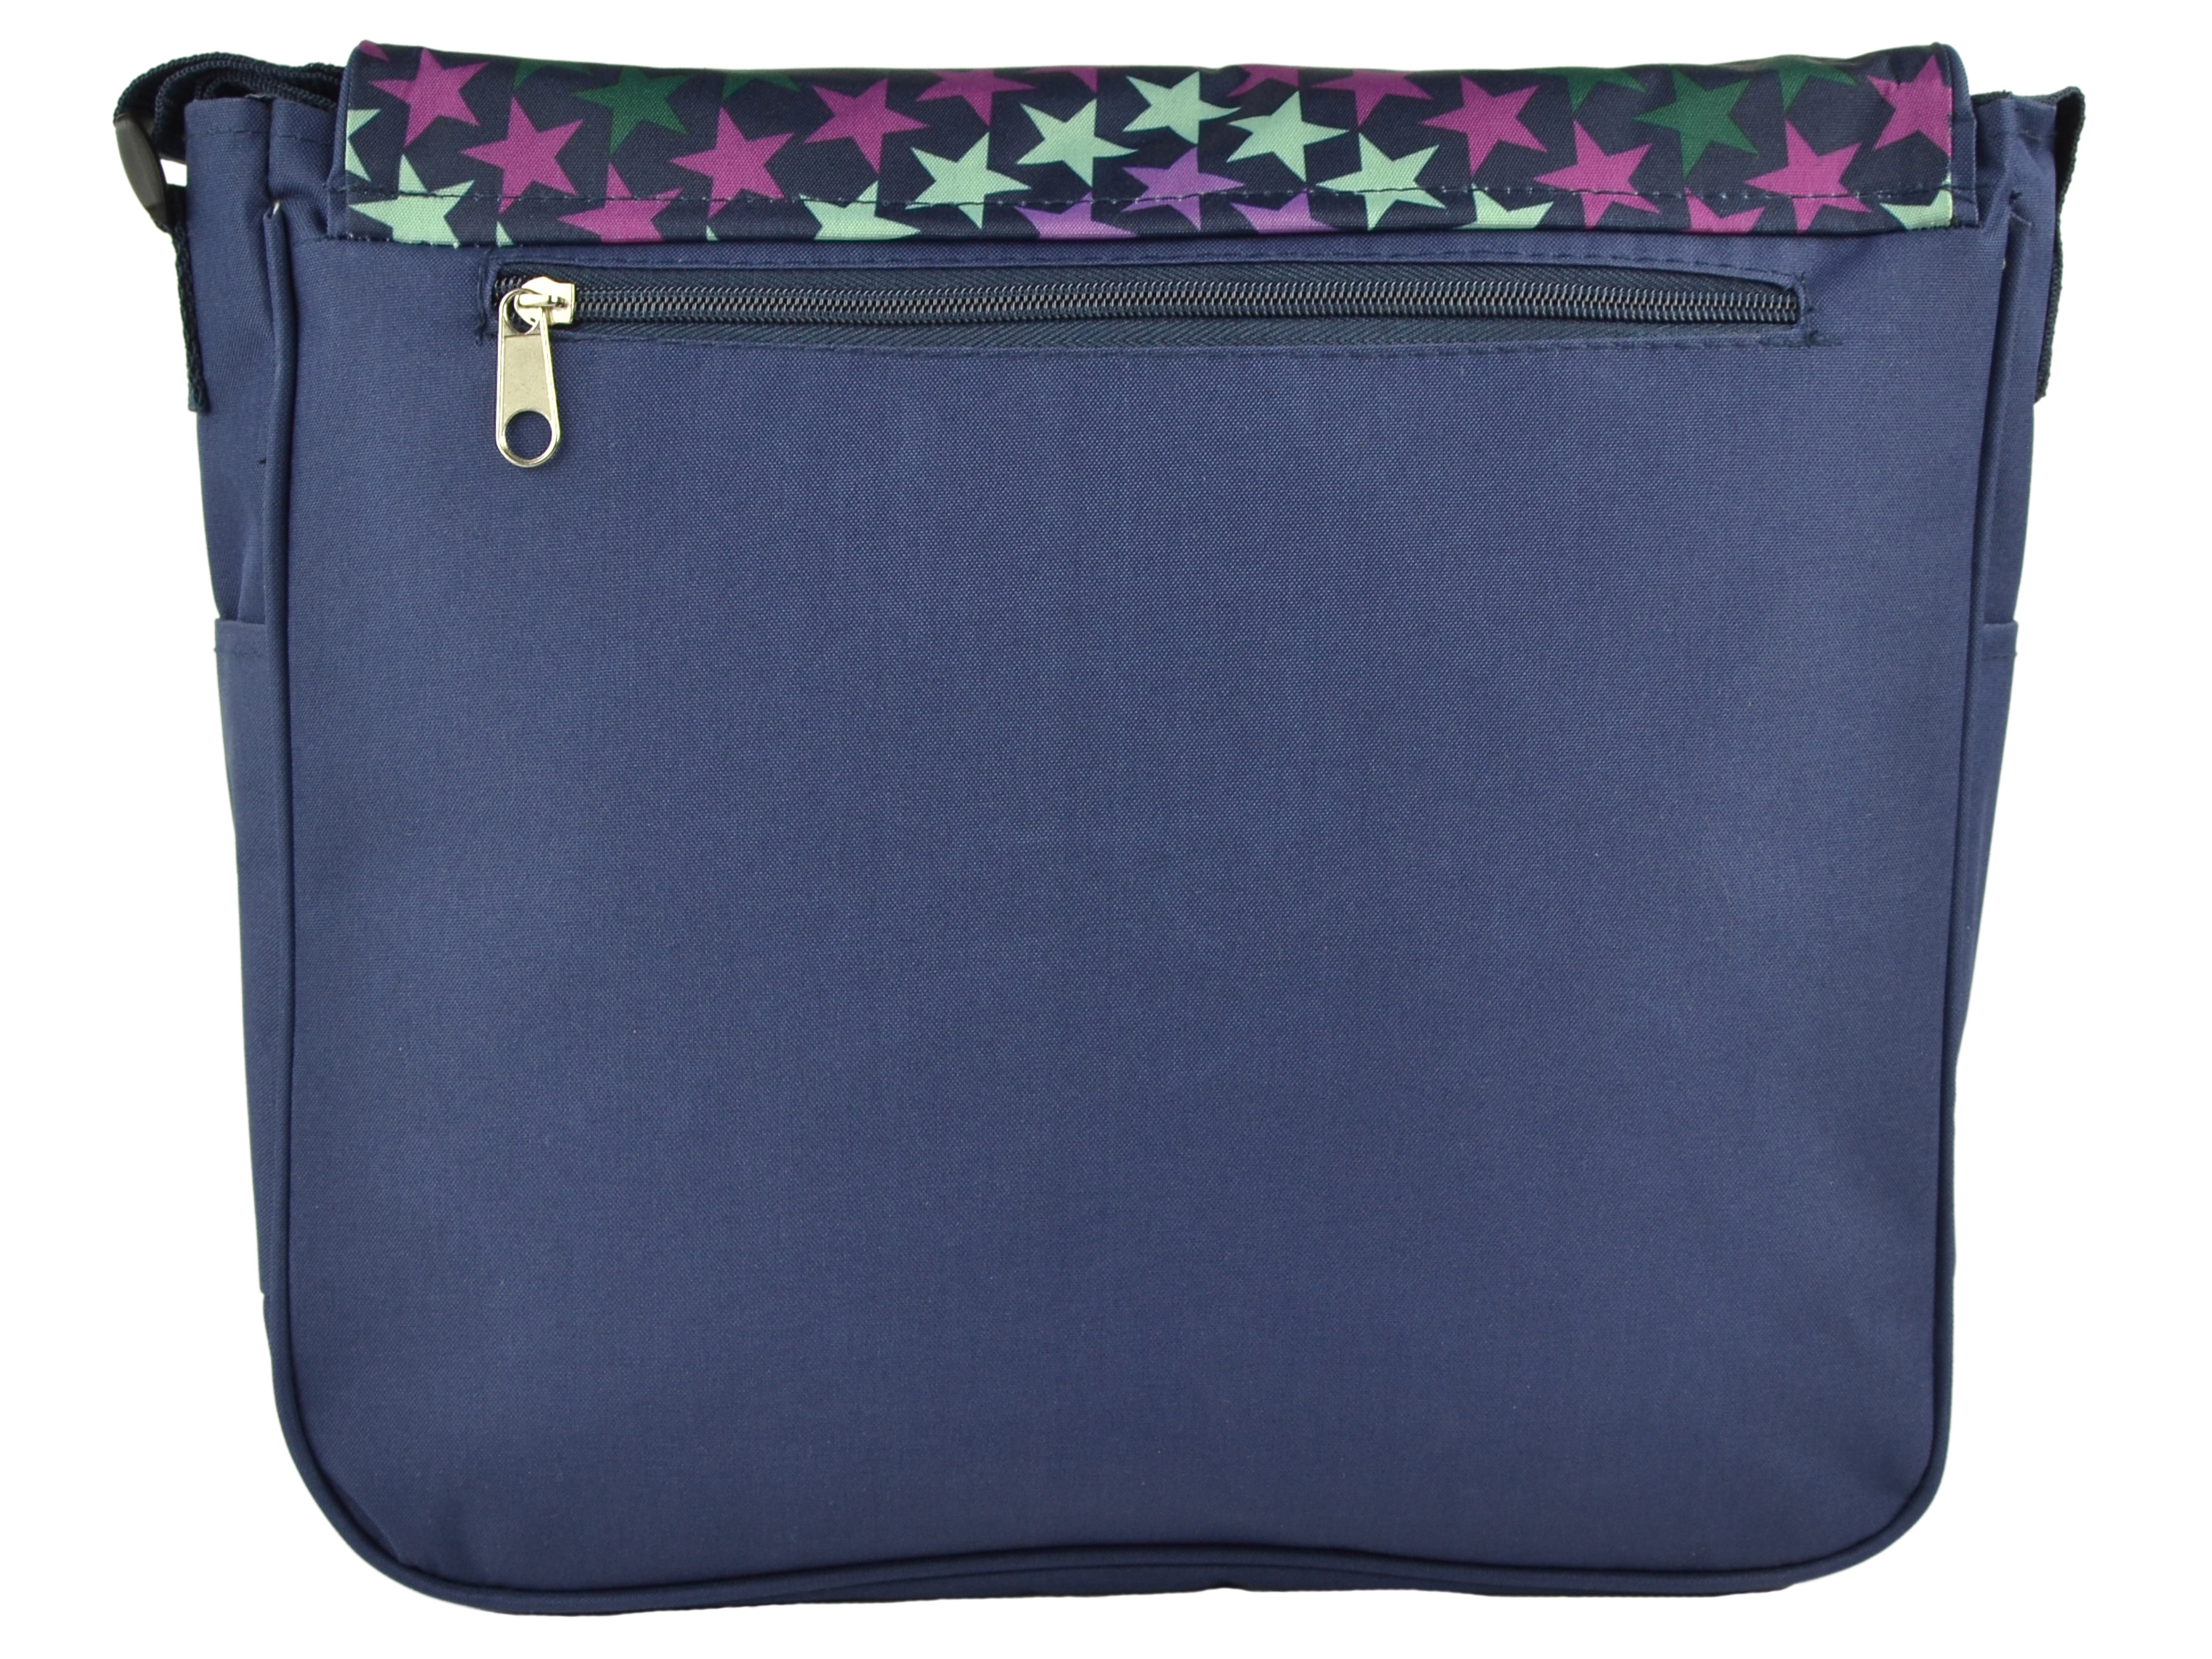  OTVEE Starry Sky Galaxy Messenger Bag, 15.6 inch Canvas  Briefcase School Office Satchel Shoulder Bag: Clothing, Shoes & Jewelry